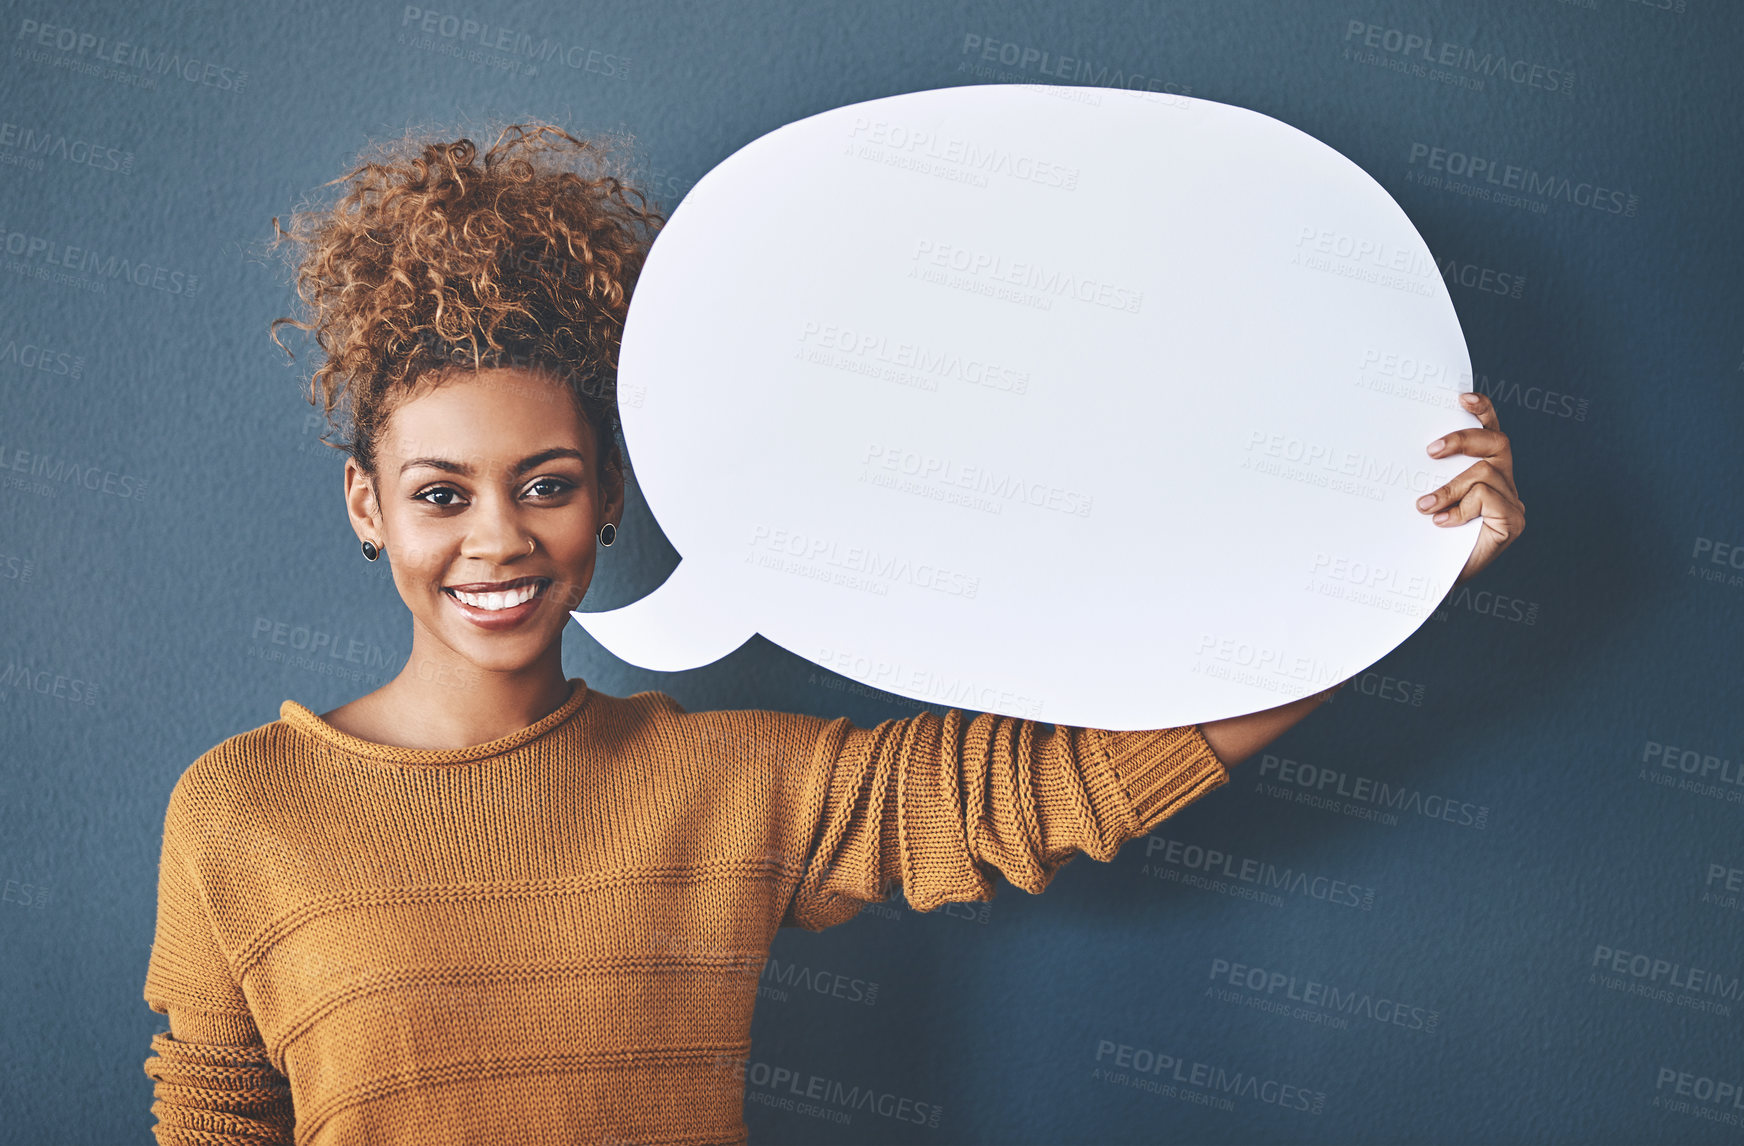 Buy stock photo Studio shot of a young woman holding a speech bubble against a grey background